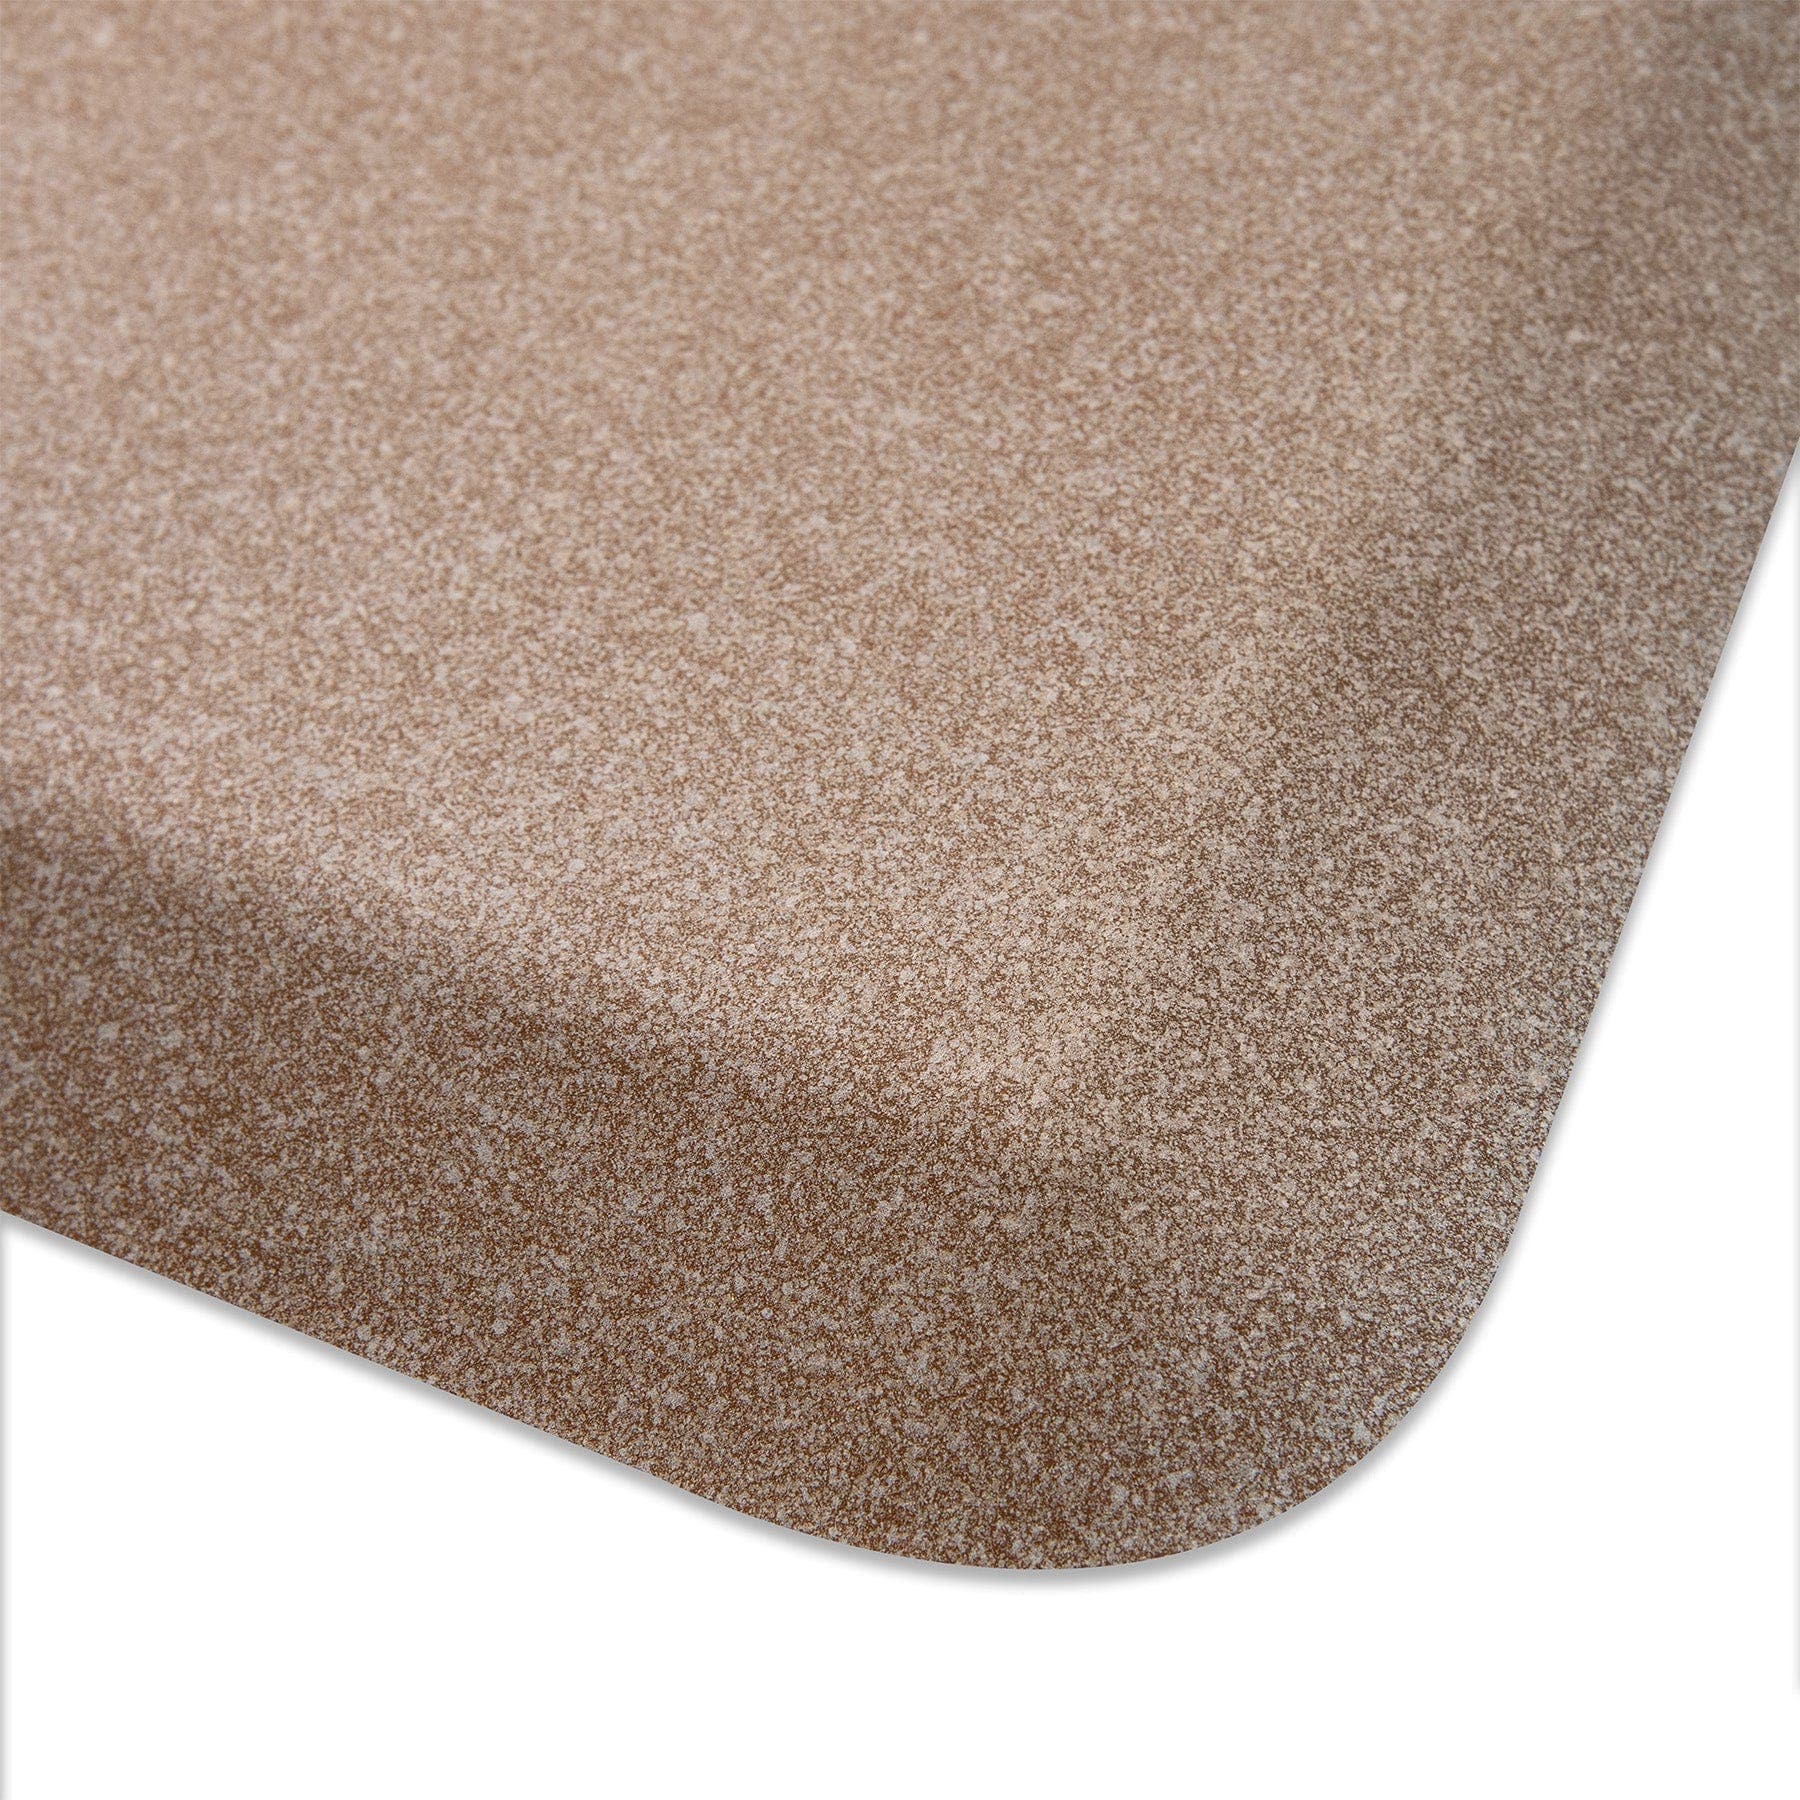 WellnessMats All WellnessMats WellnessMats Granite Collection - Sand